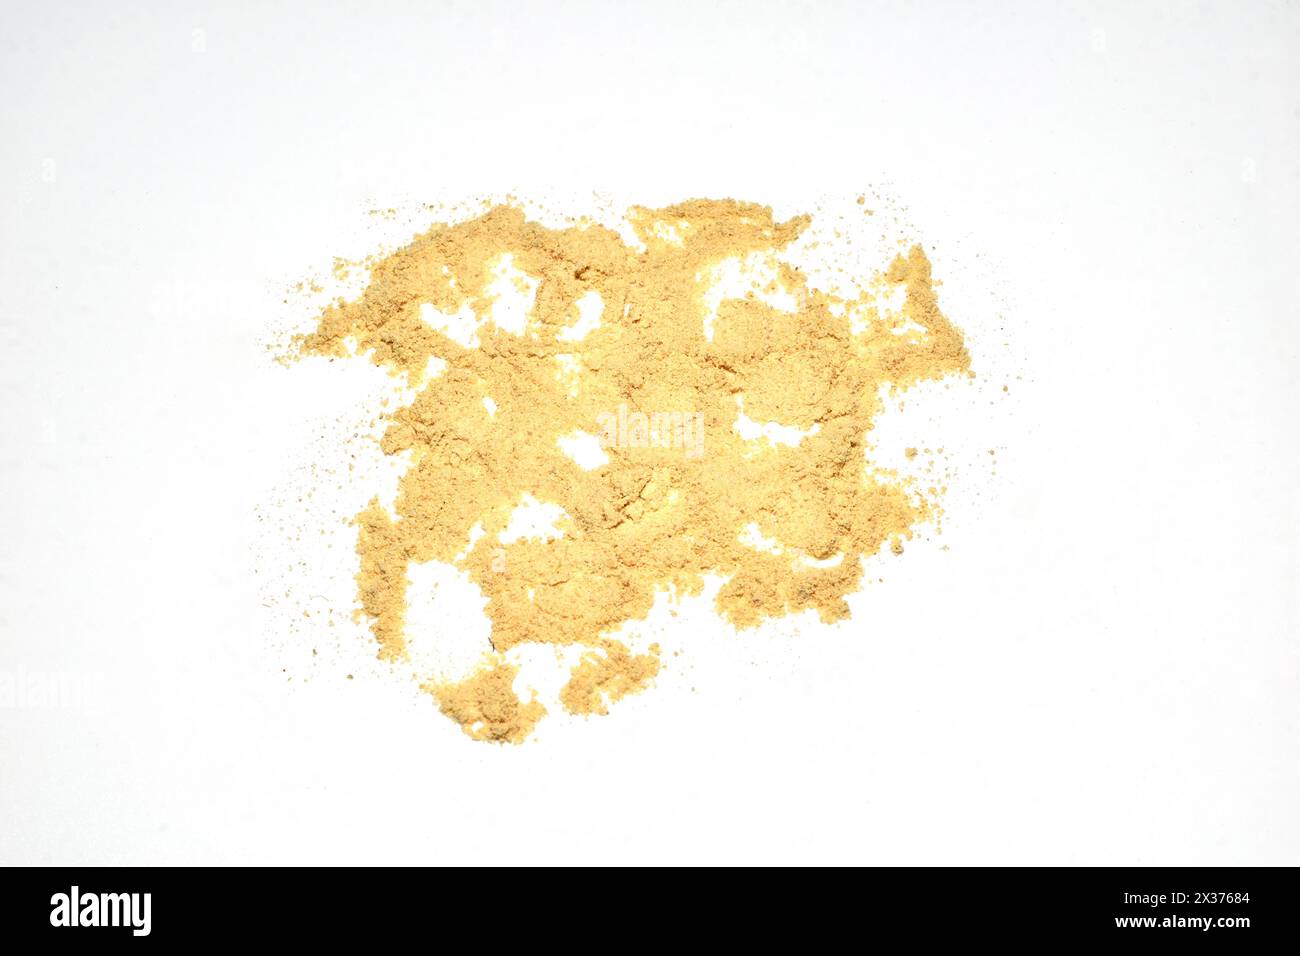 Ground ginger spice is scattered on a white background and is used in cooking. Stock Photo